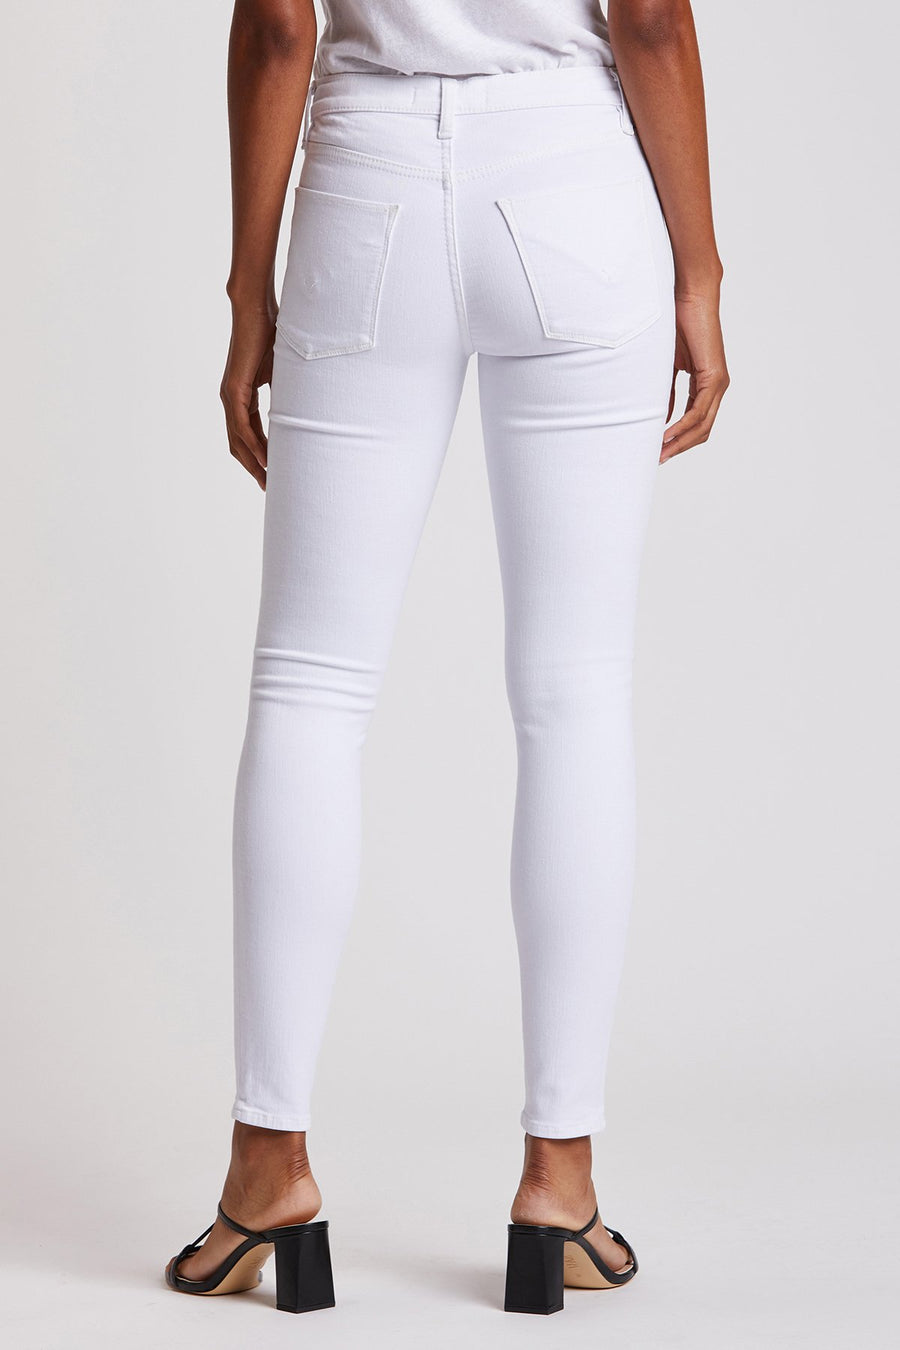 HUDSON JEANS Nico Mid-rise in White